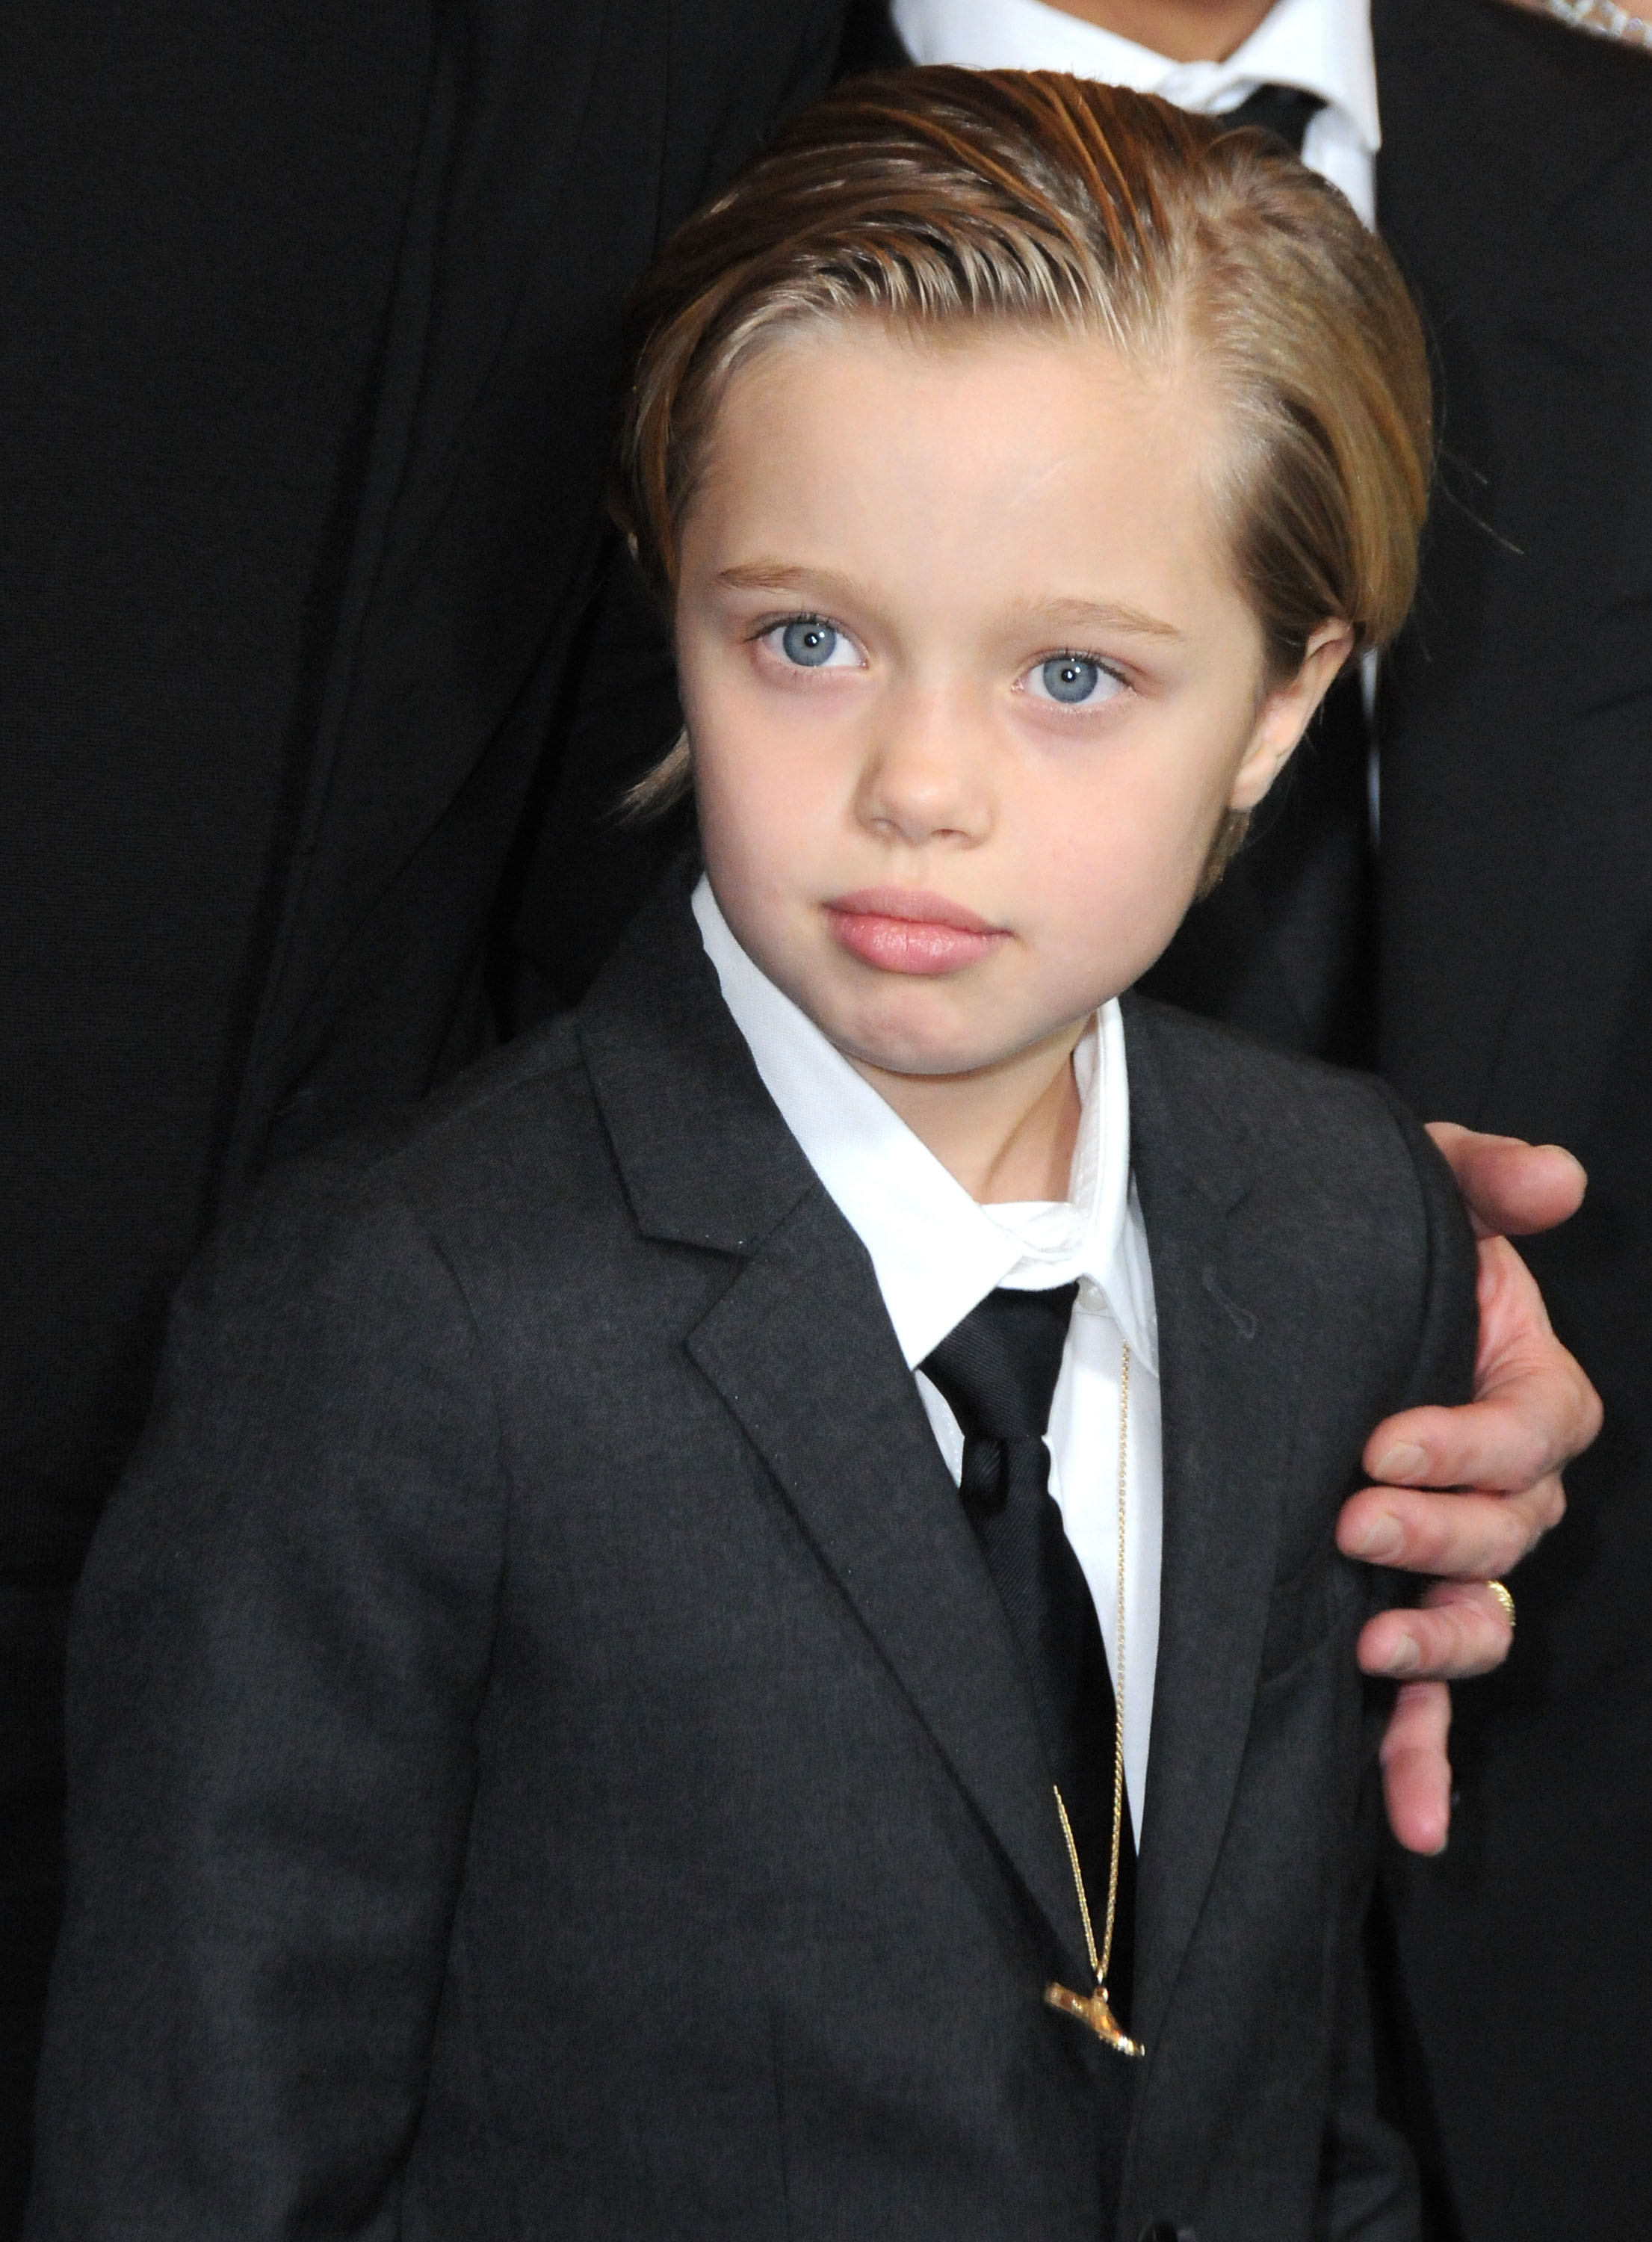 Shiloh Nouvel Jolie-Pitt at\\u00a0the premiere of "Unbroken"\\u00a0on December 15, 2014, in Hollywood, California | Source: Getty Images